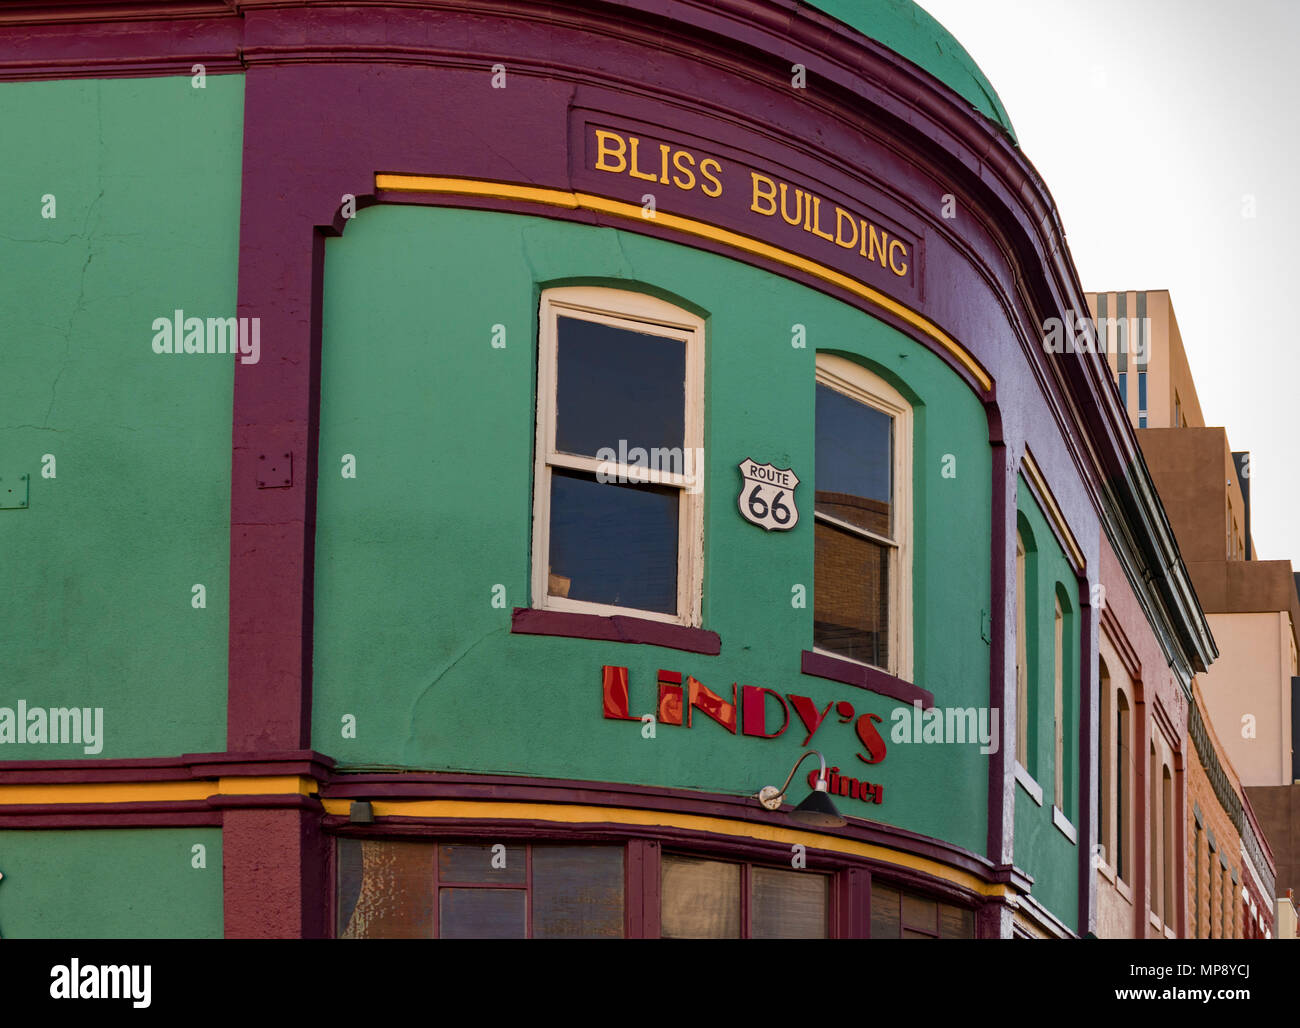 Albuquerque, New Mexico, USA - April 14, 2018: Historic Bliss Building, Lindy's Diner, on Route 66, Downtown Albuquerque, New Mexico. National Registe Stock Photo